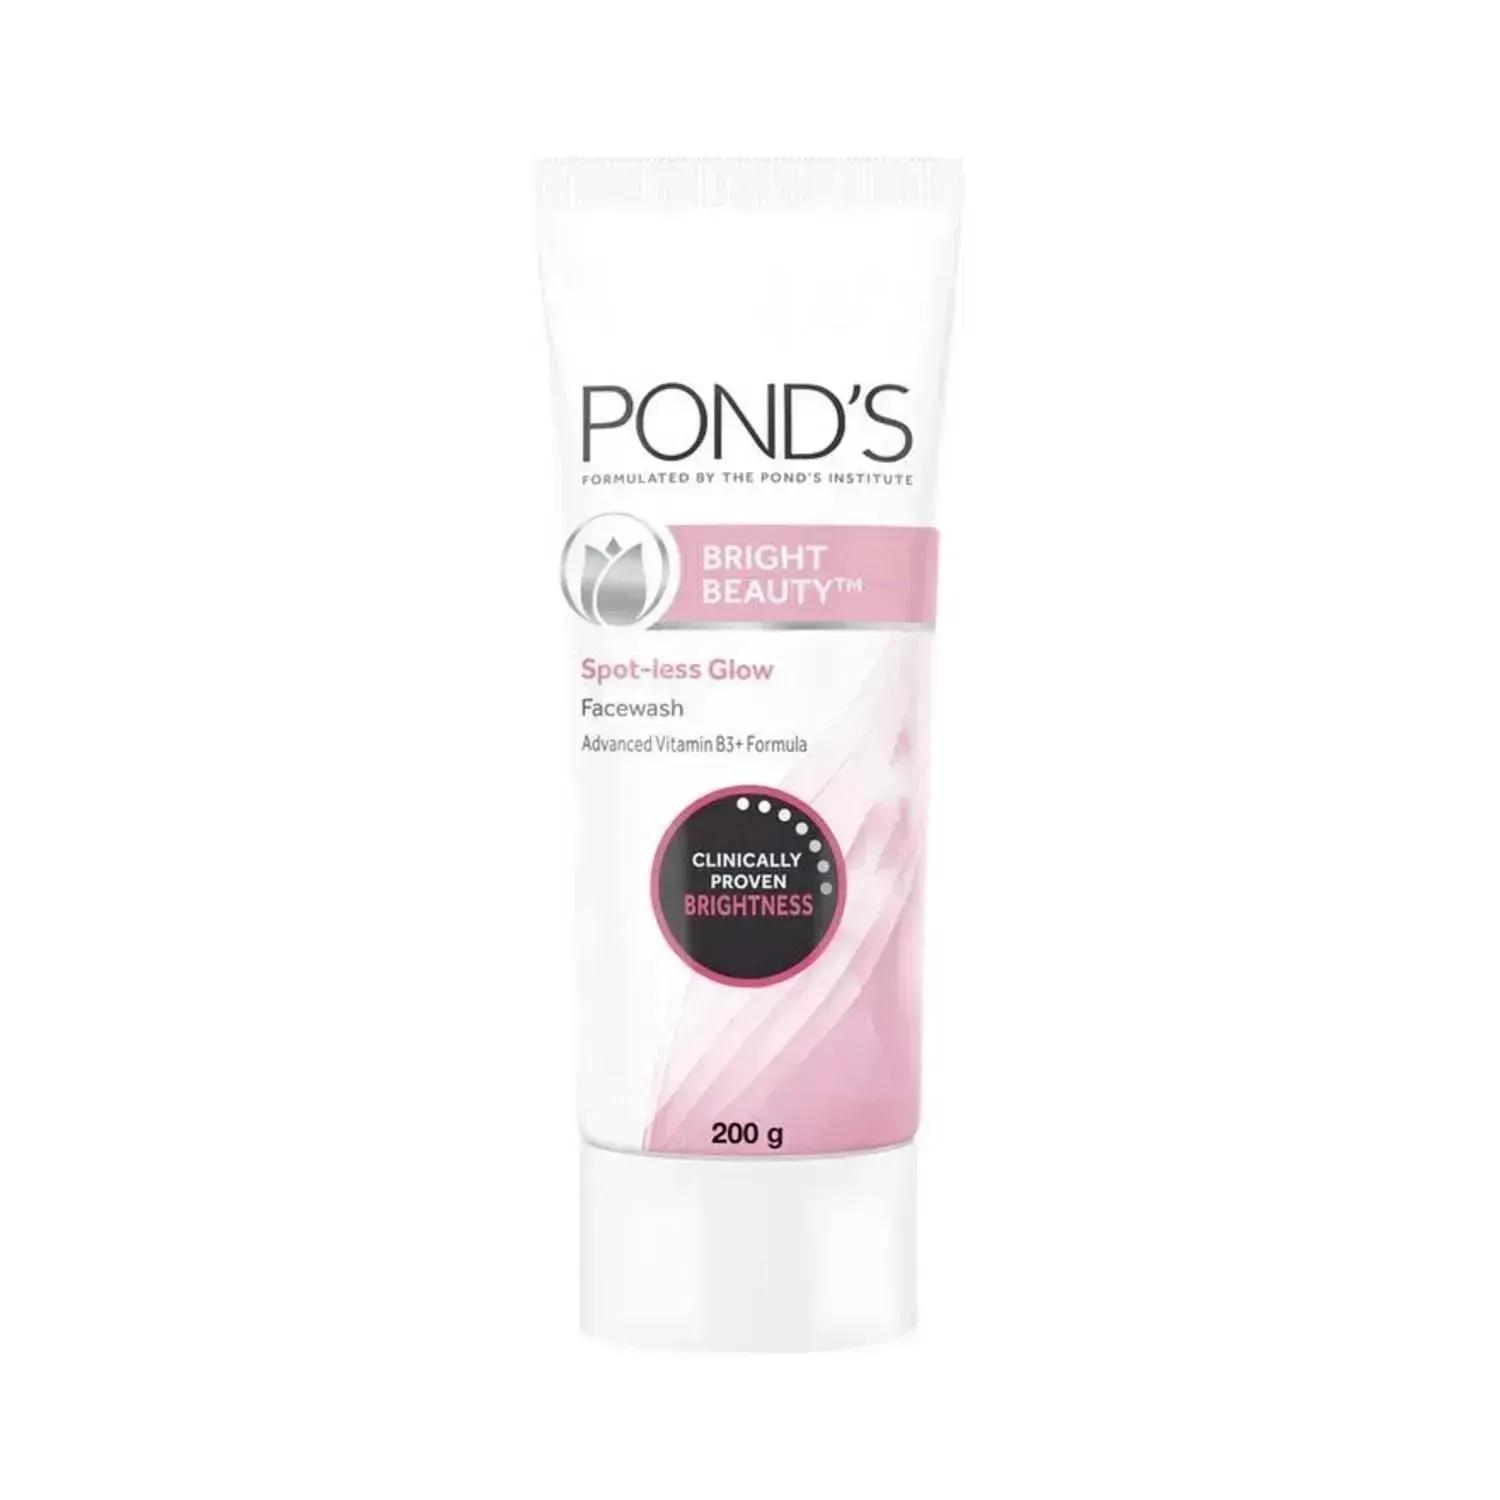 pond's-bright-beauty-spot-less-glow-face-wash---(200g)